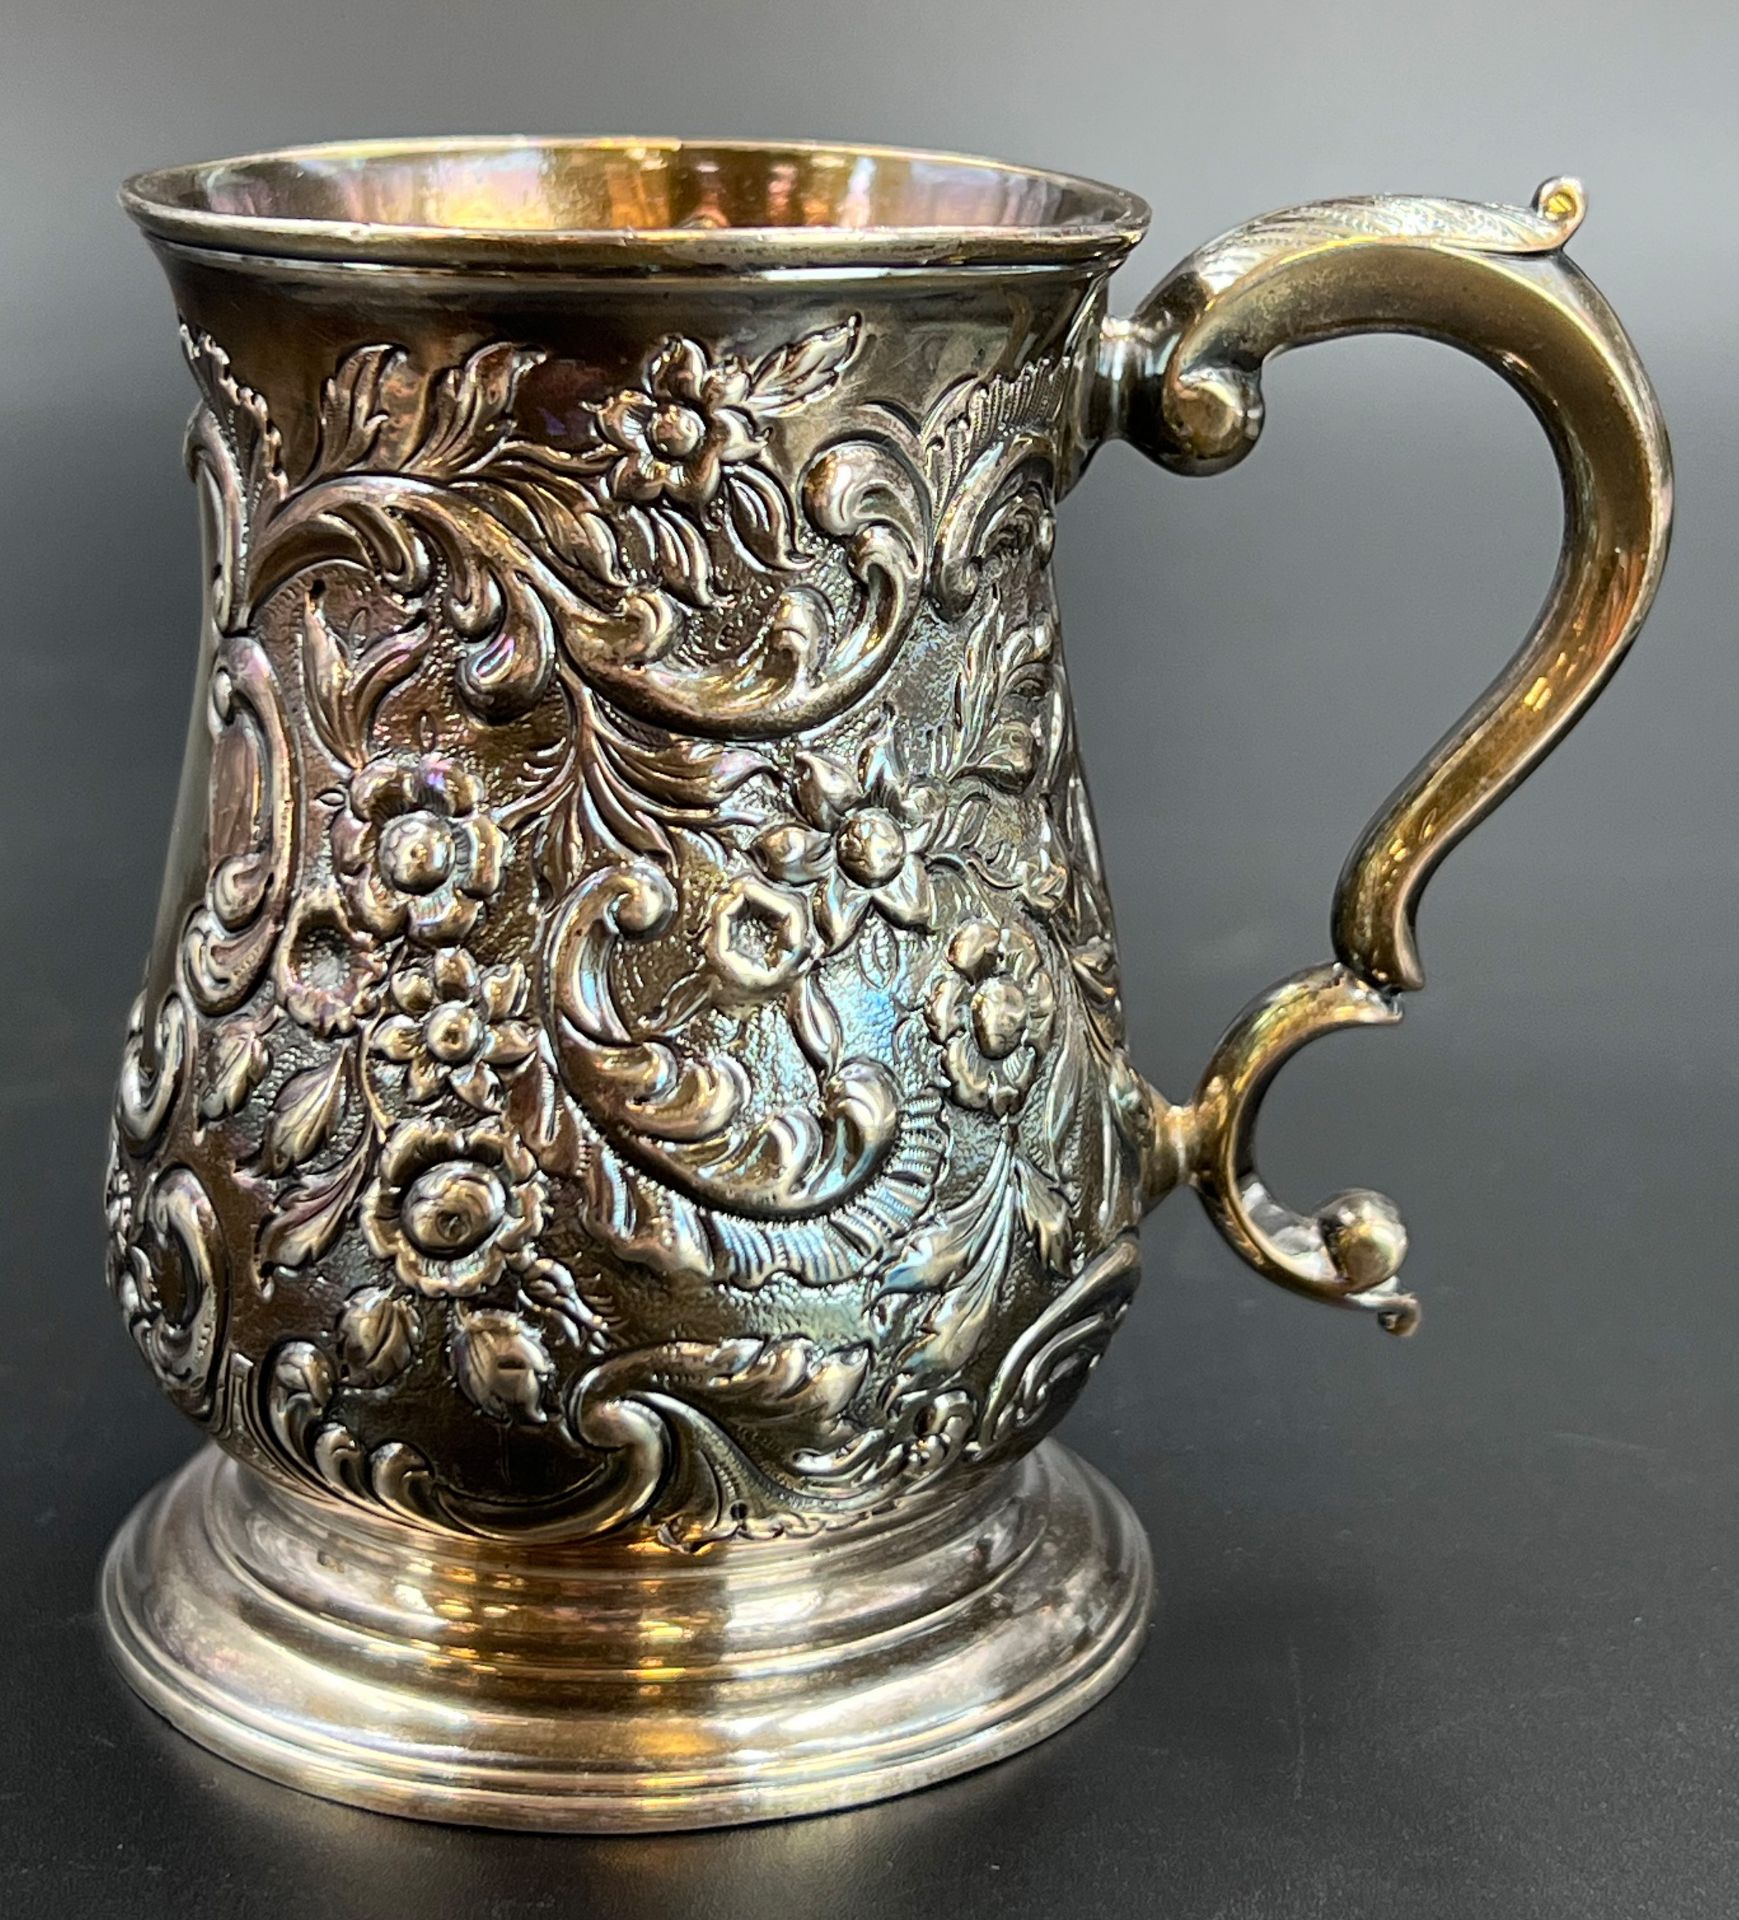 Antique silver cup. 925 Sterling silver. England. 1762.